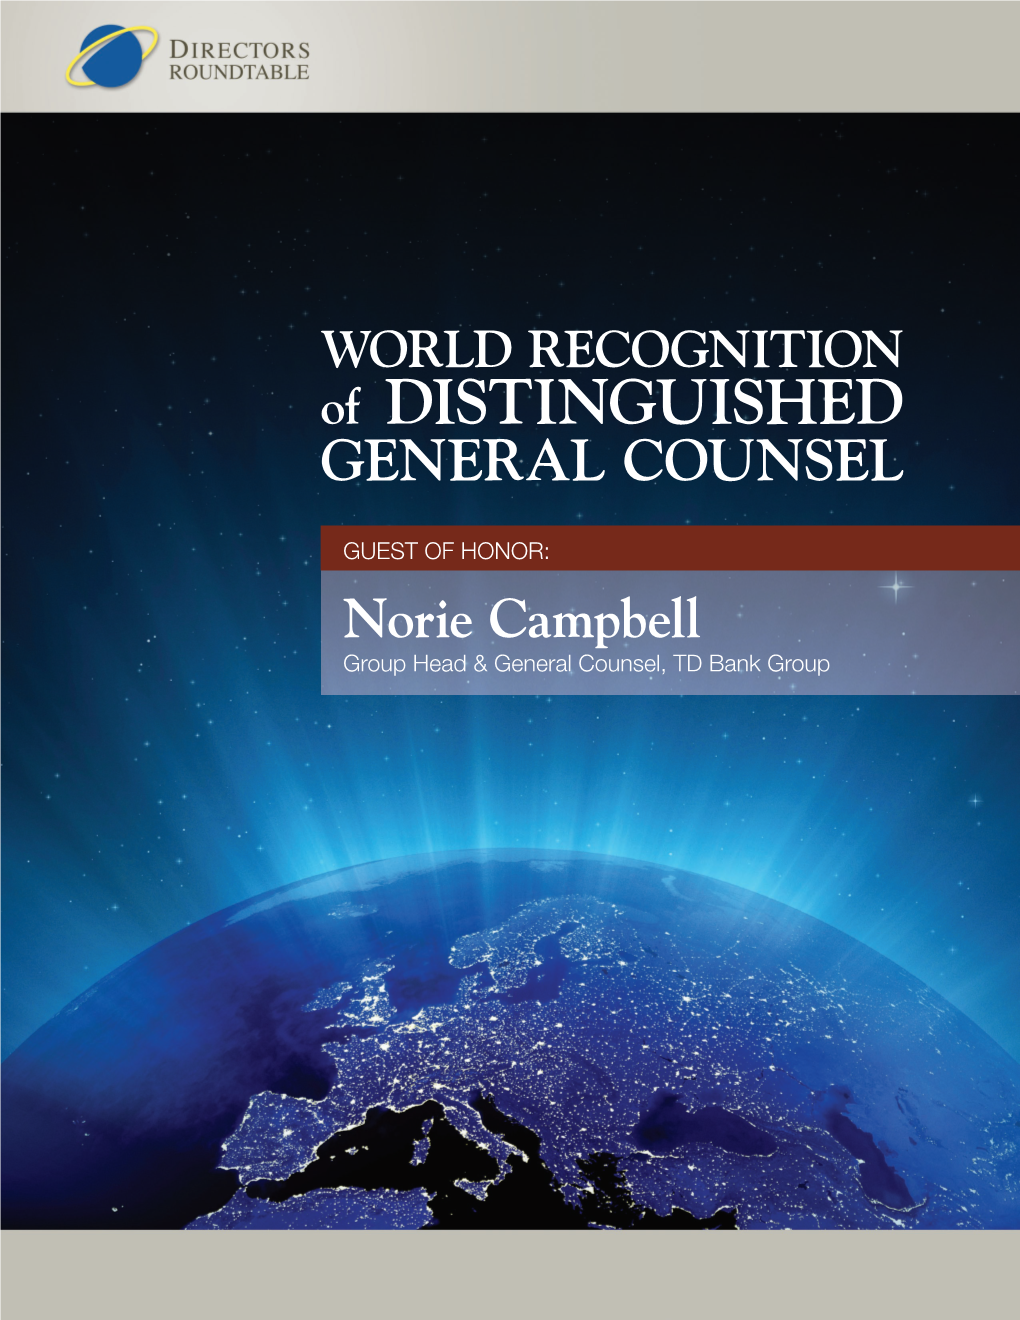 WORLD RECOGNITION of DISTINGUISHED GENERAL COUNSEL